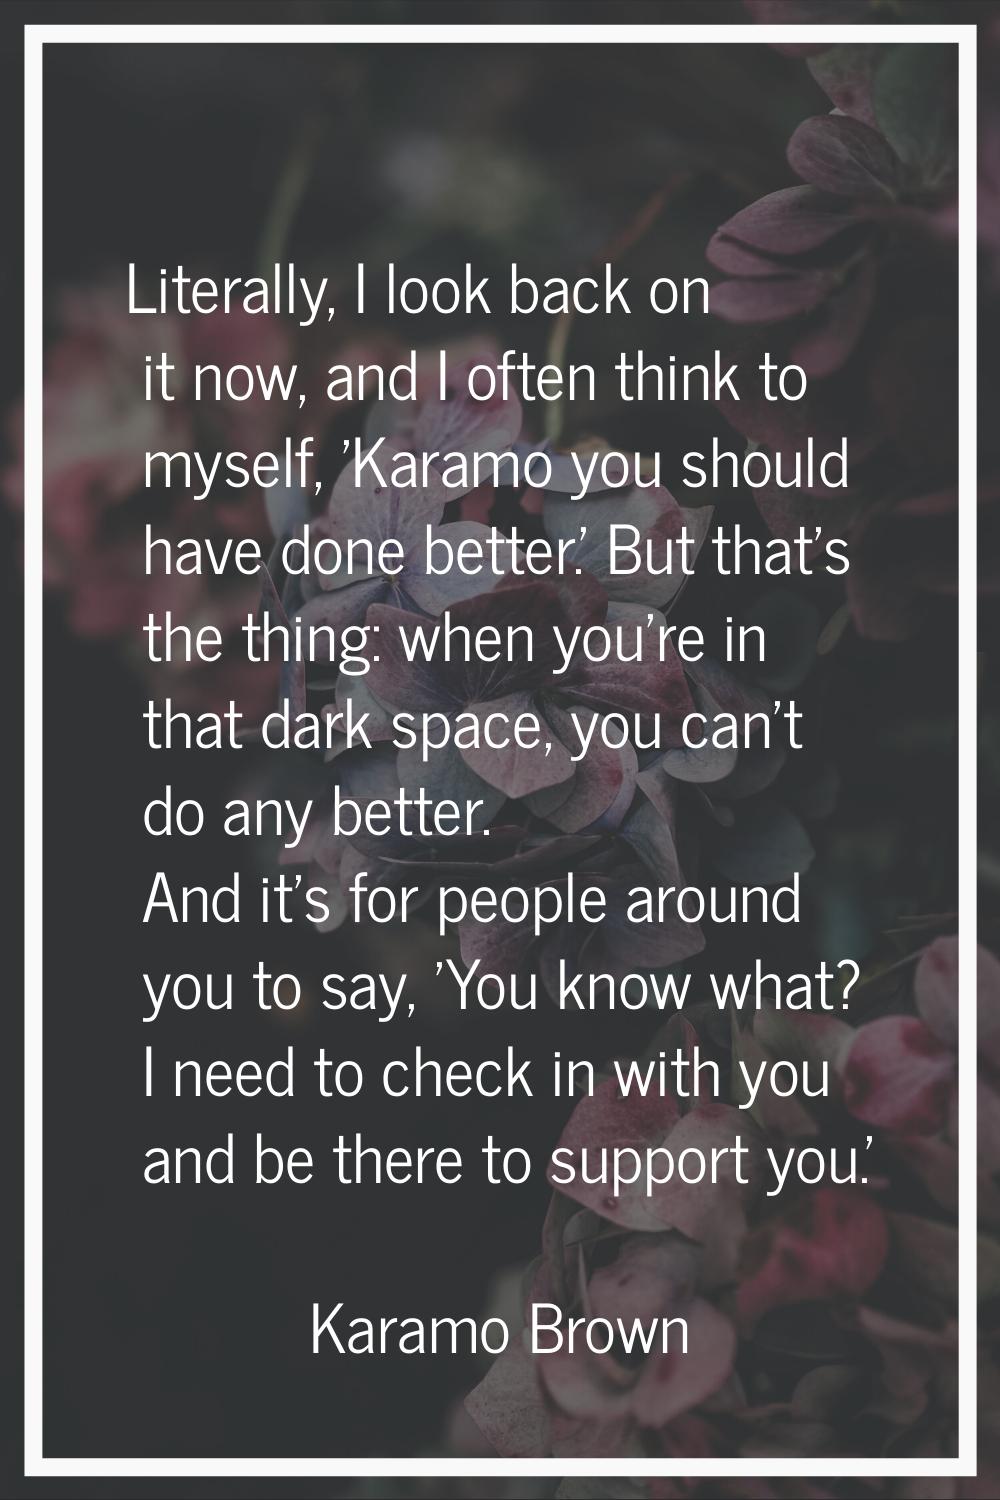 Literally, I look back on it now, and I often think to myself, 'Karamo you should have done better.